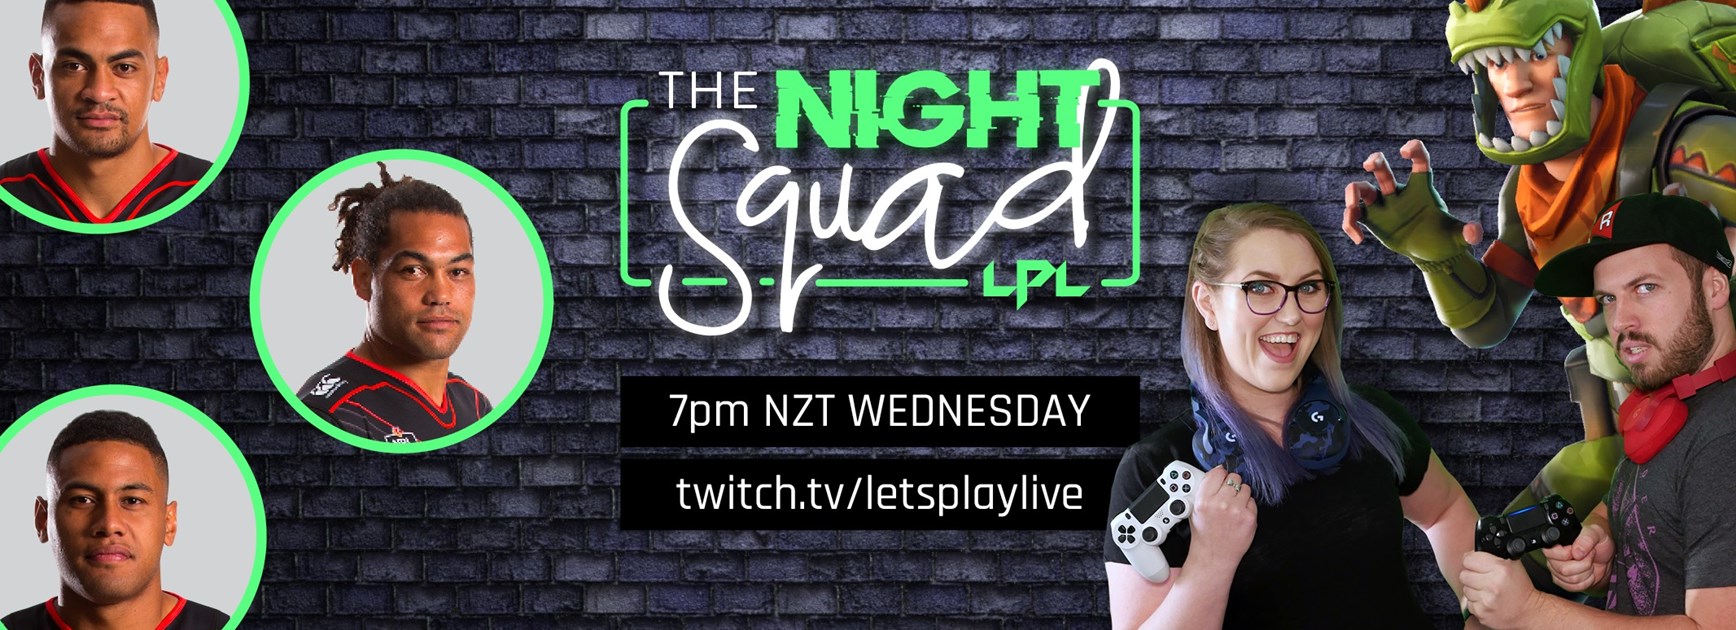 Locked in for 'The Night Squad' tonight